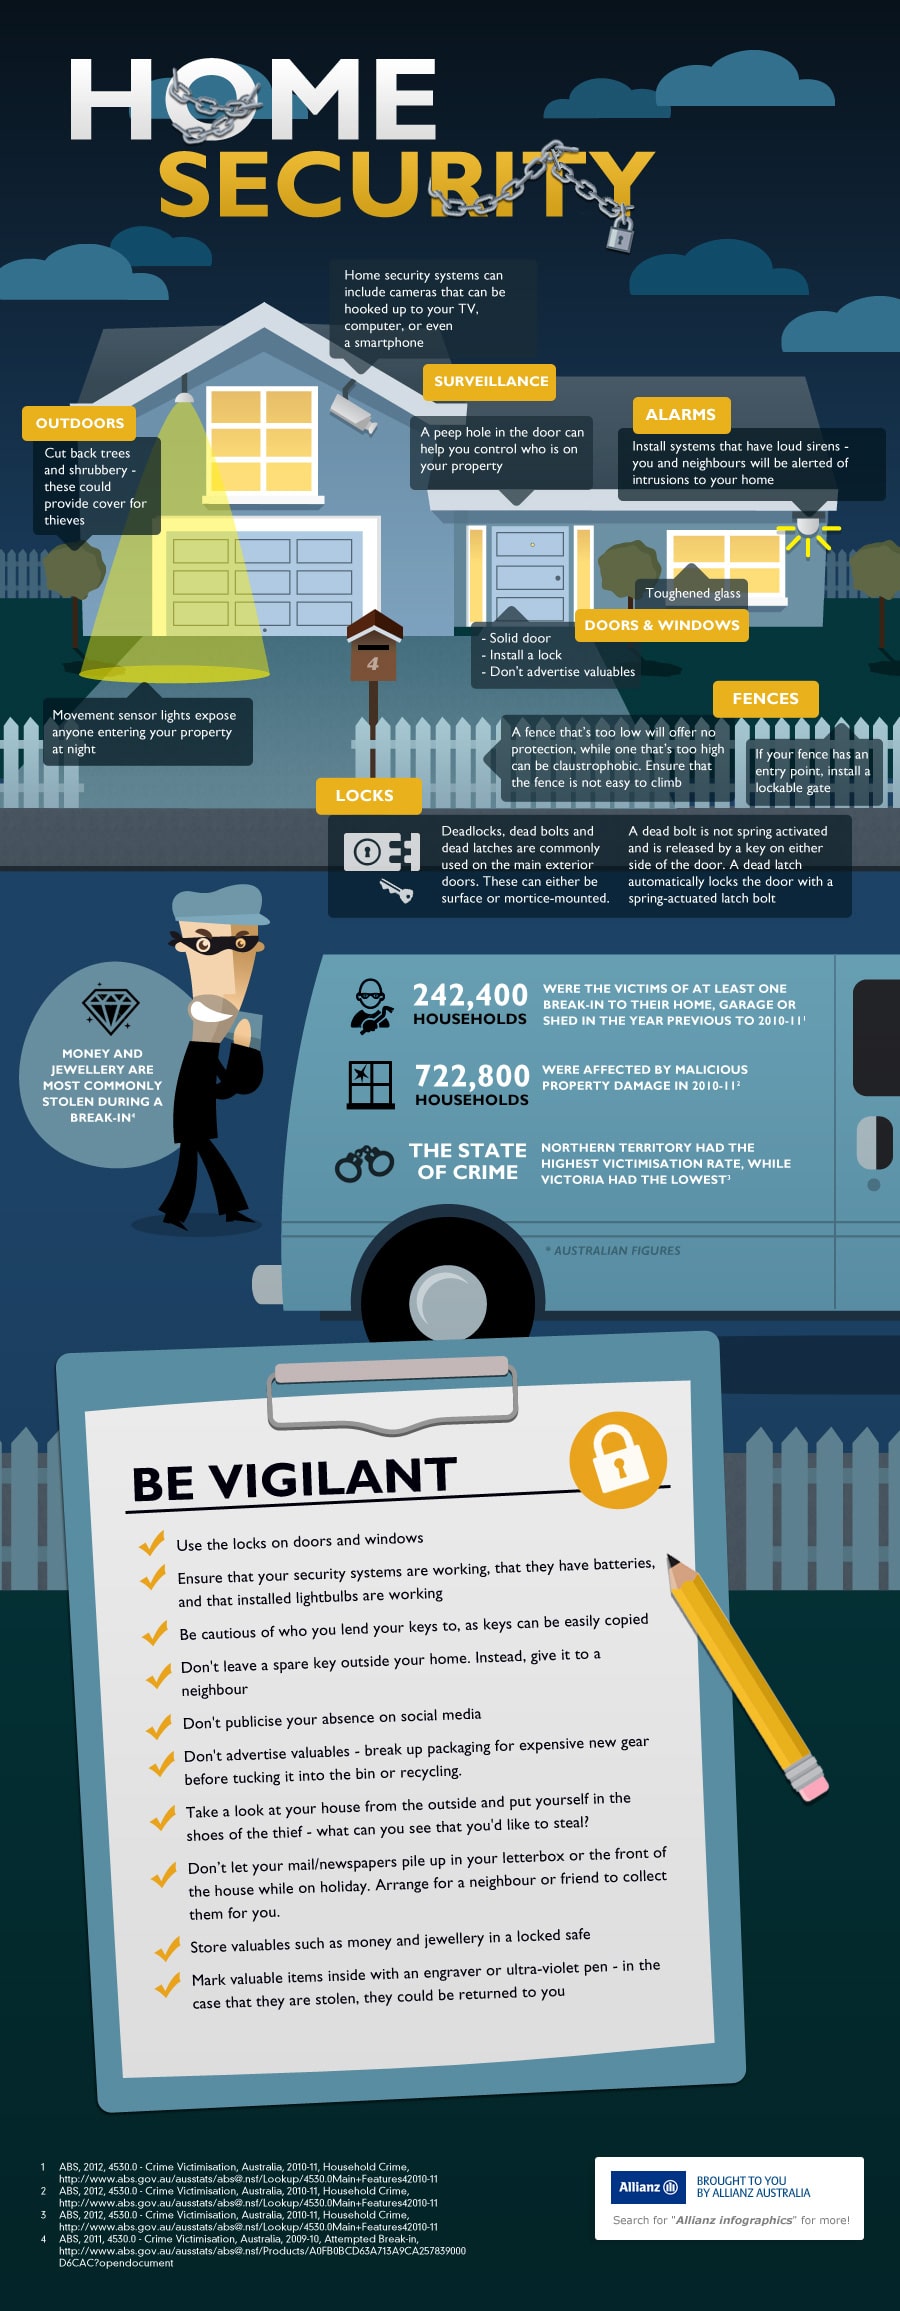 allianz-home-insurance-infographic-security